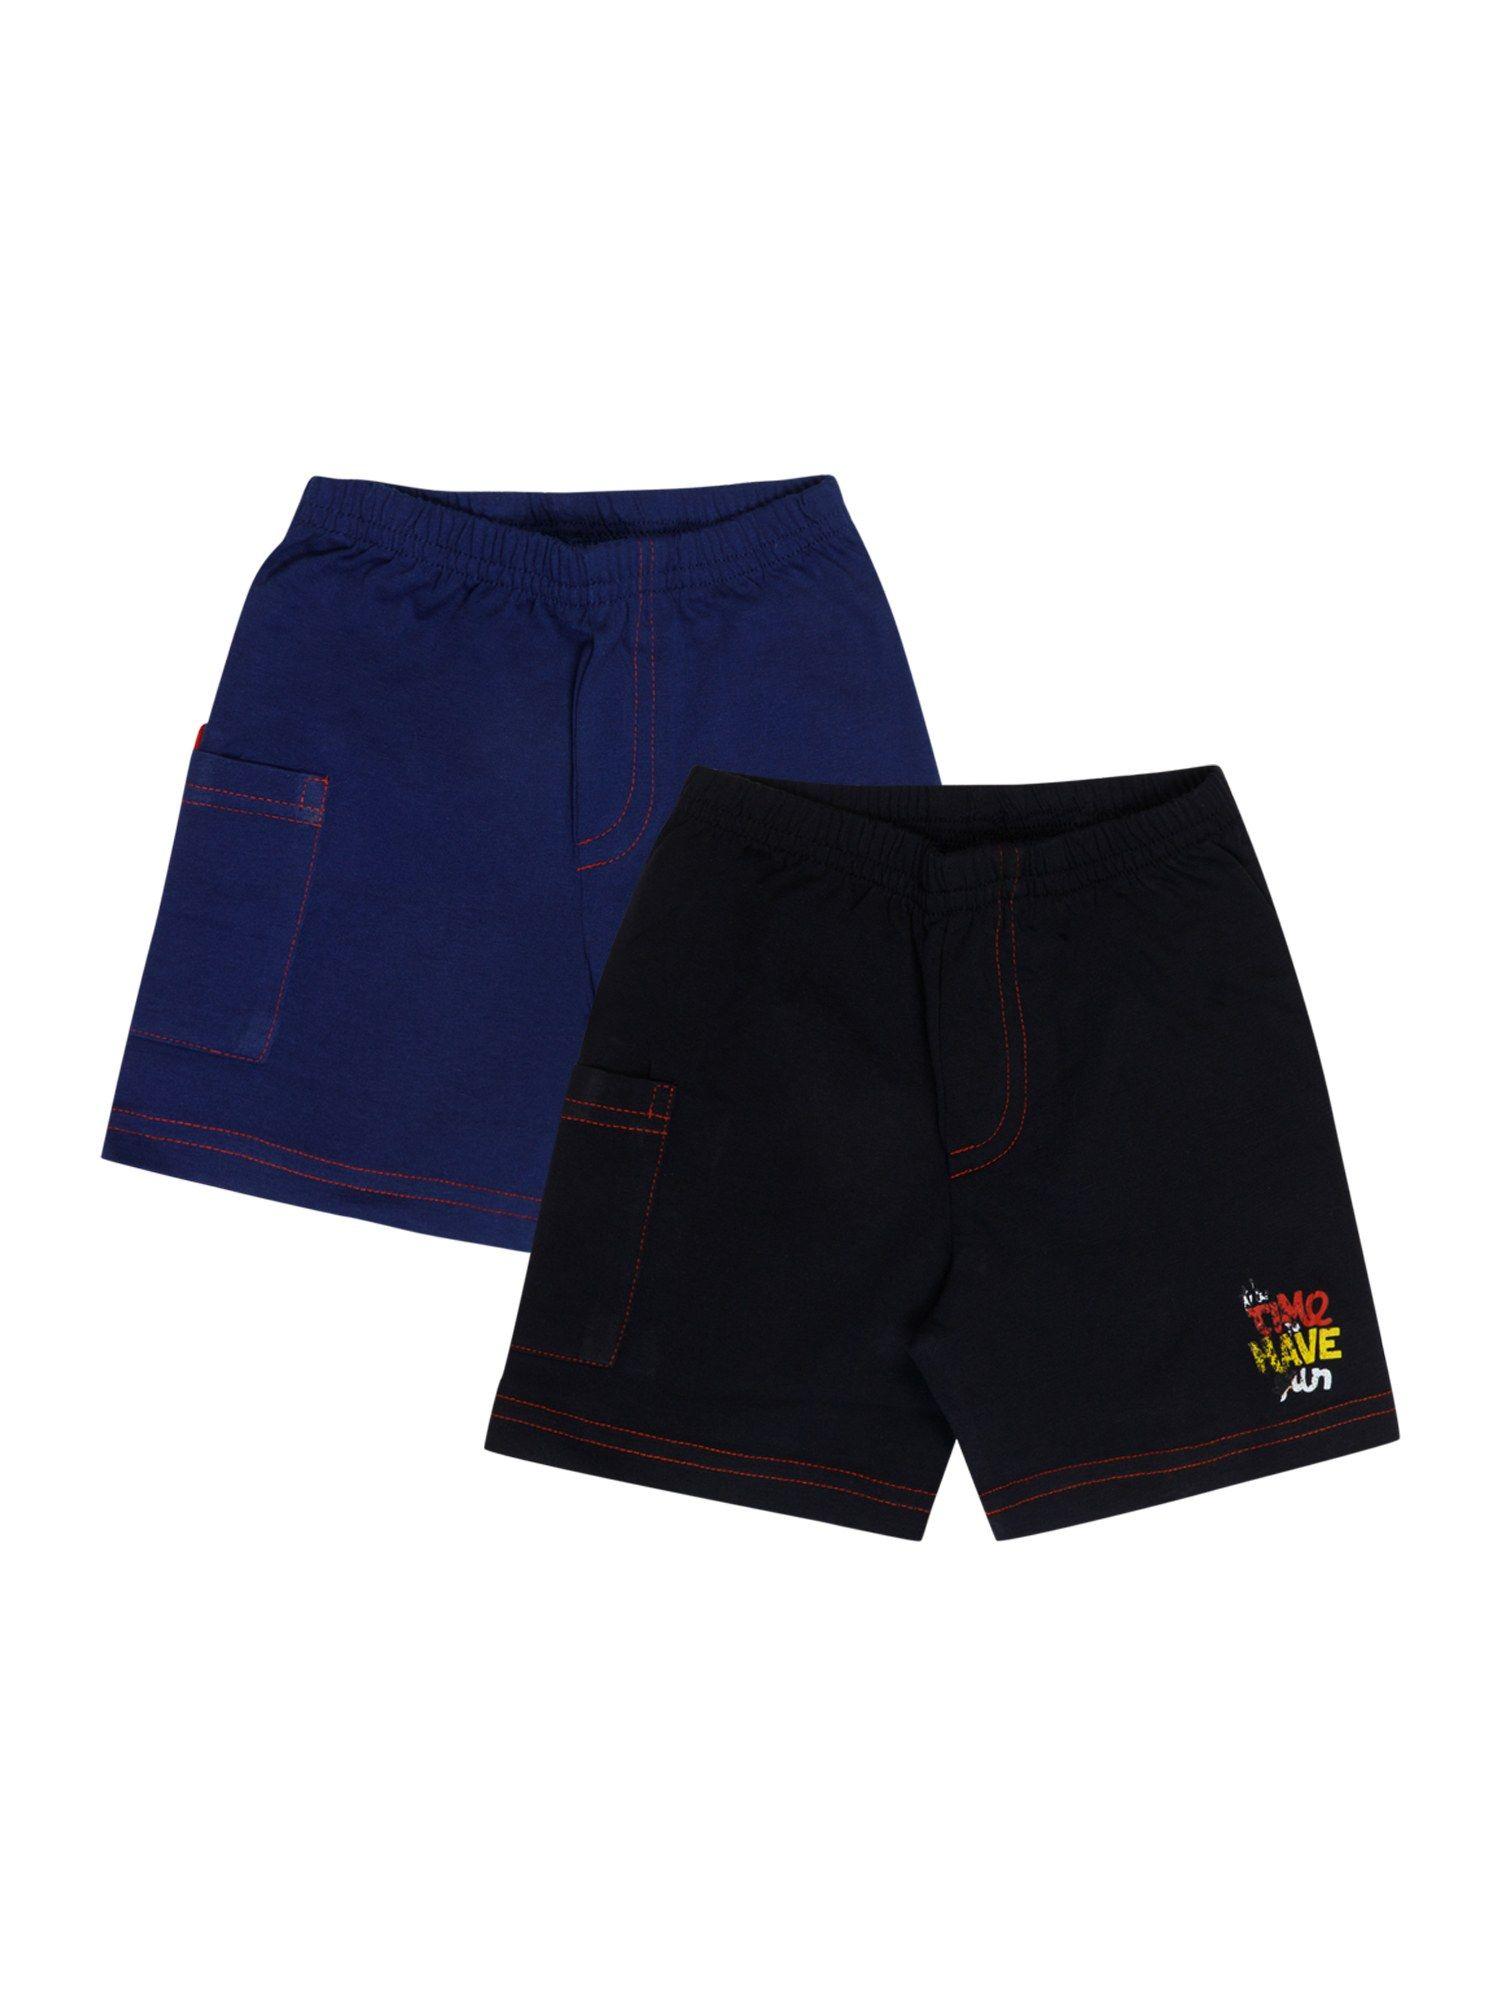 solid shorts-multi-color (pack of 2)